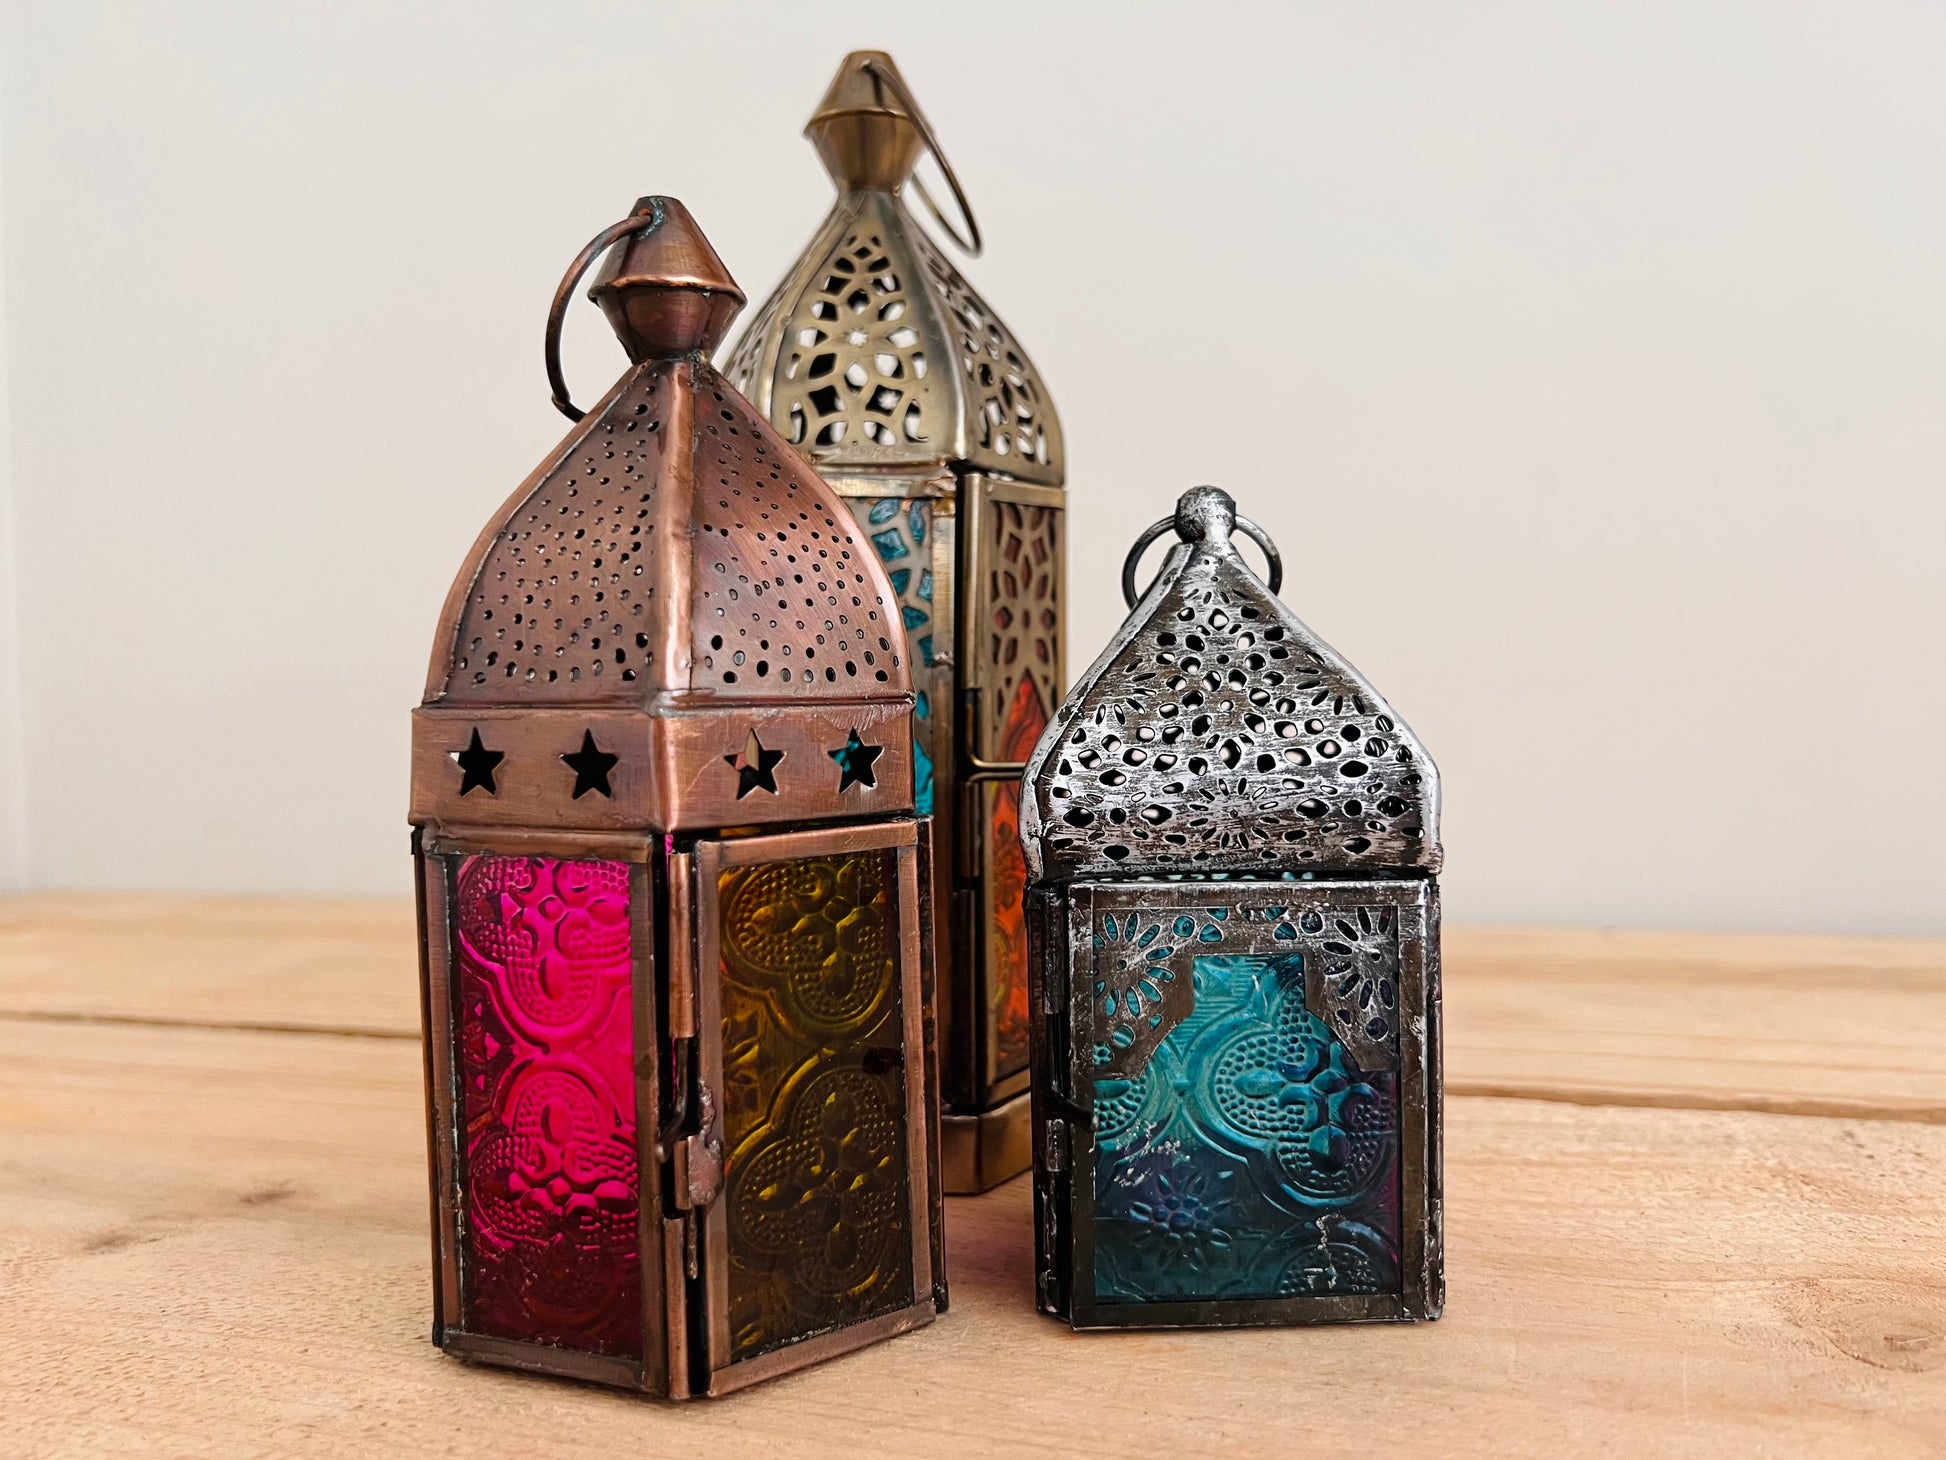 pink and yellow moroccan style lanterns